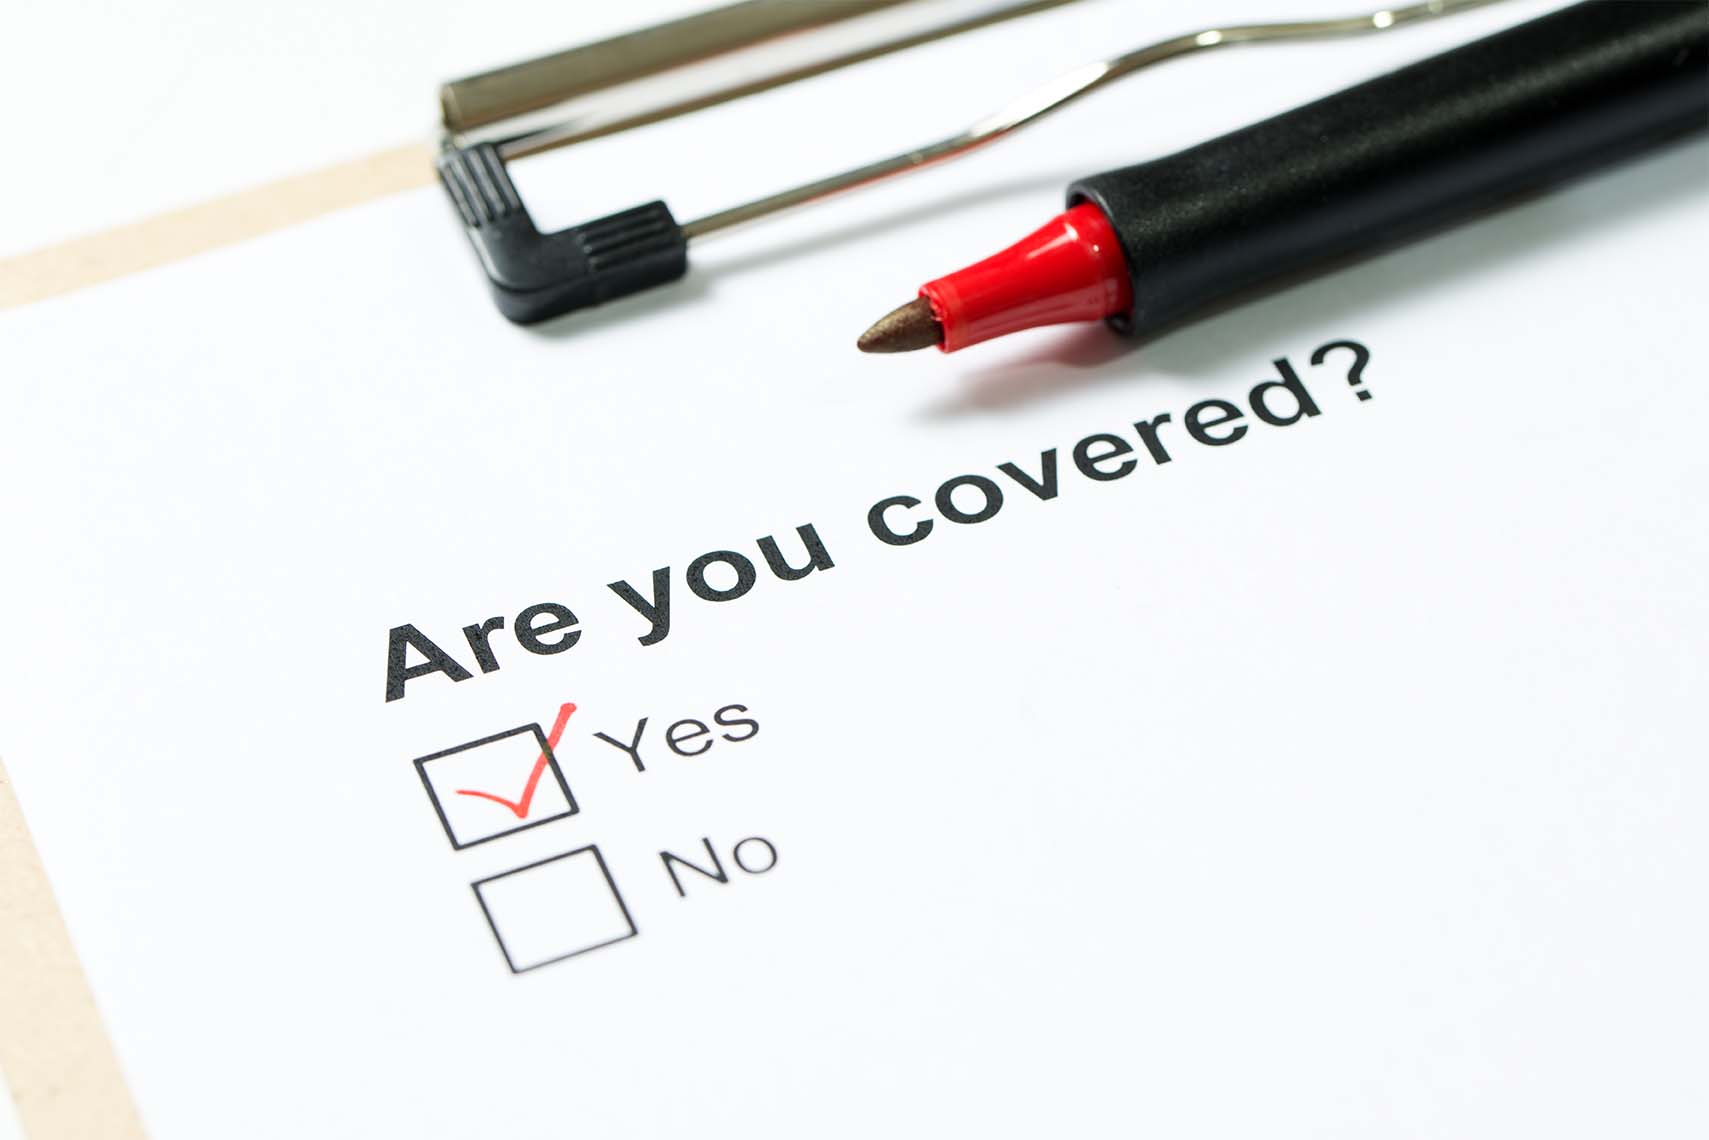 Are you covered by homeowners insurance questionnaire on clipboard with a red pen